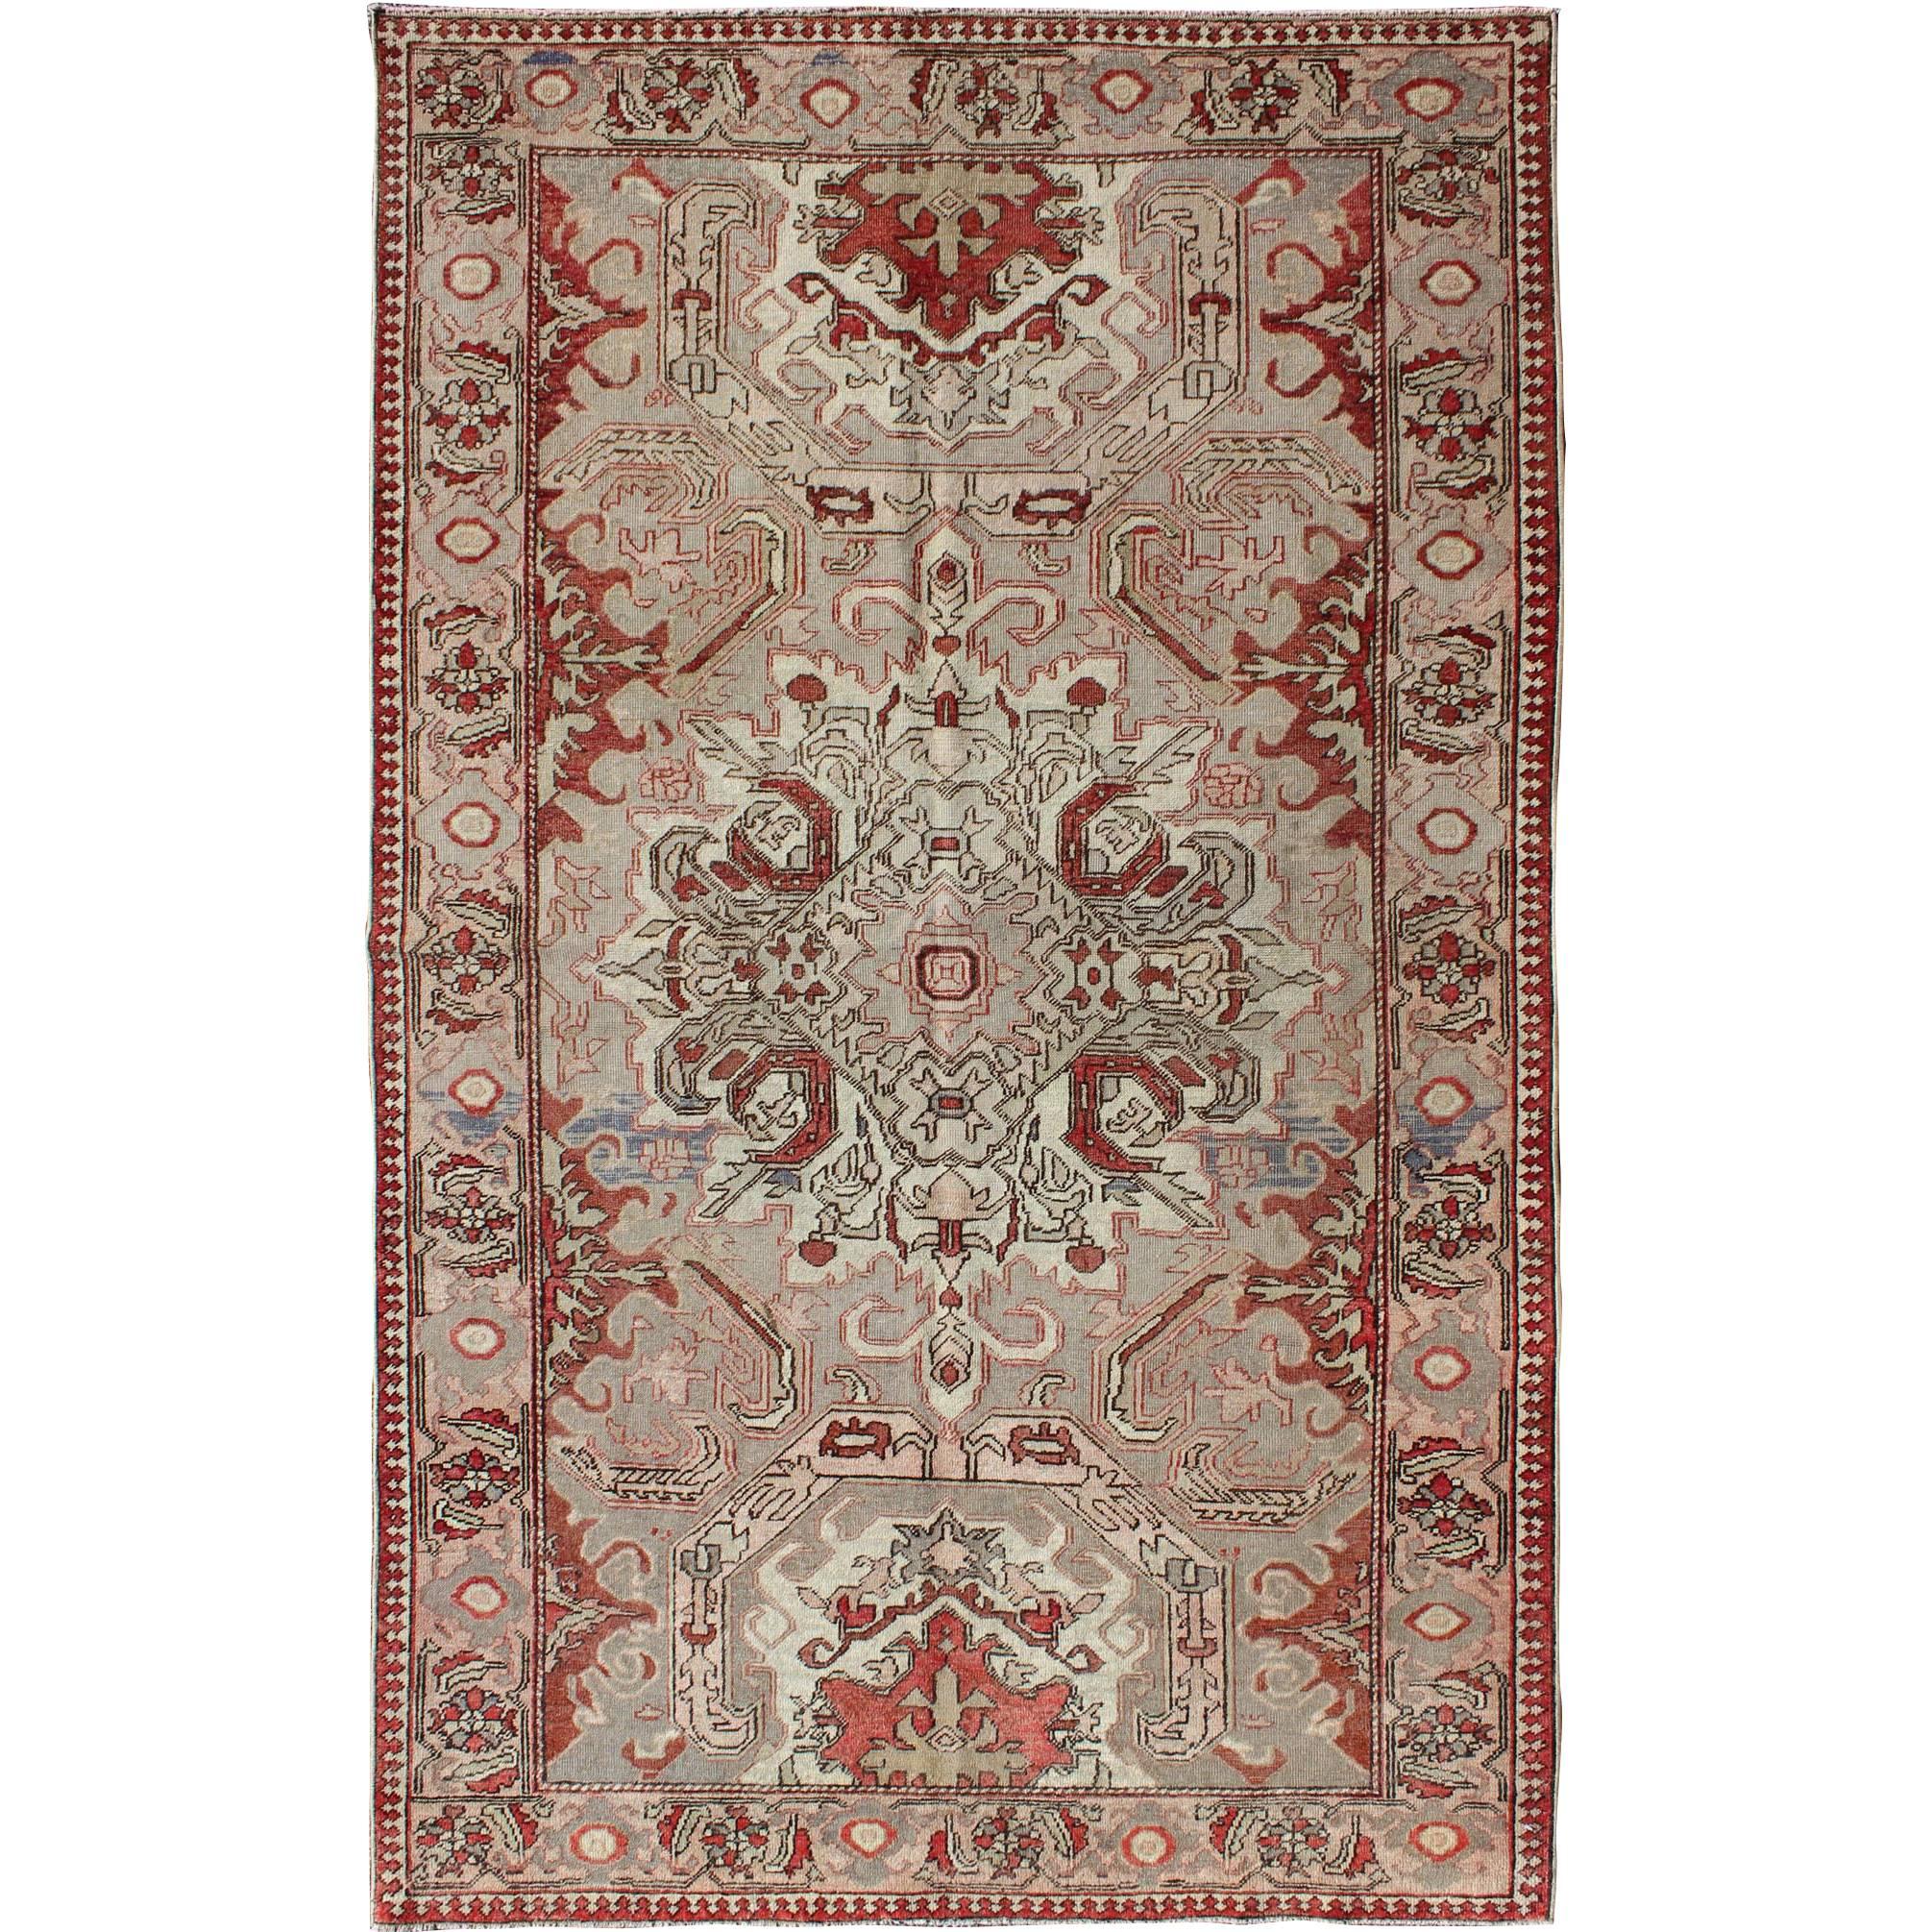 Antique Sevas Turkish Rug in Gray, Taupe, Blush, Rosewood Red and Charcoal 